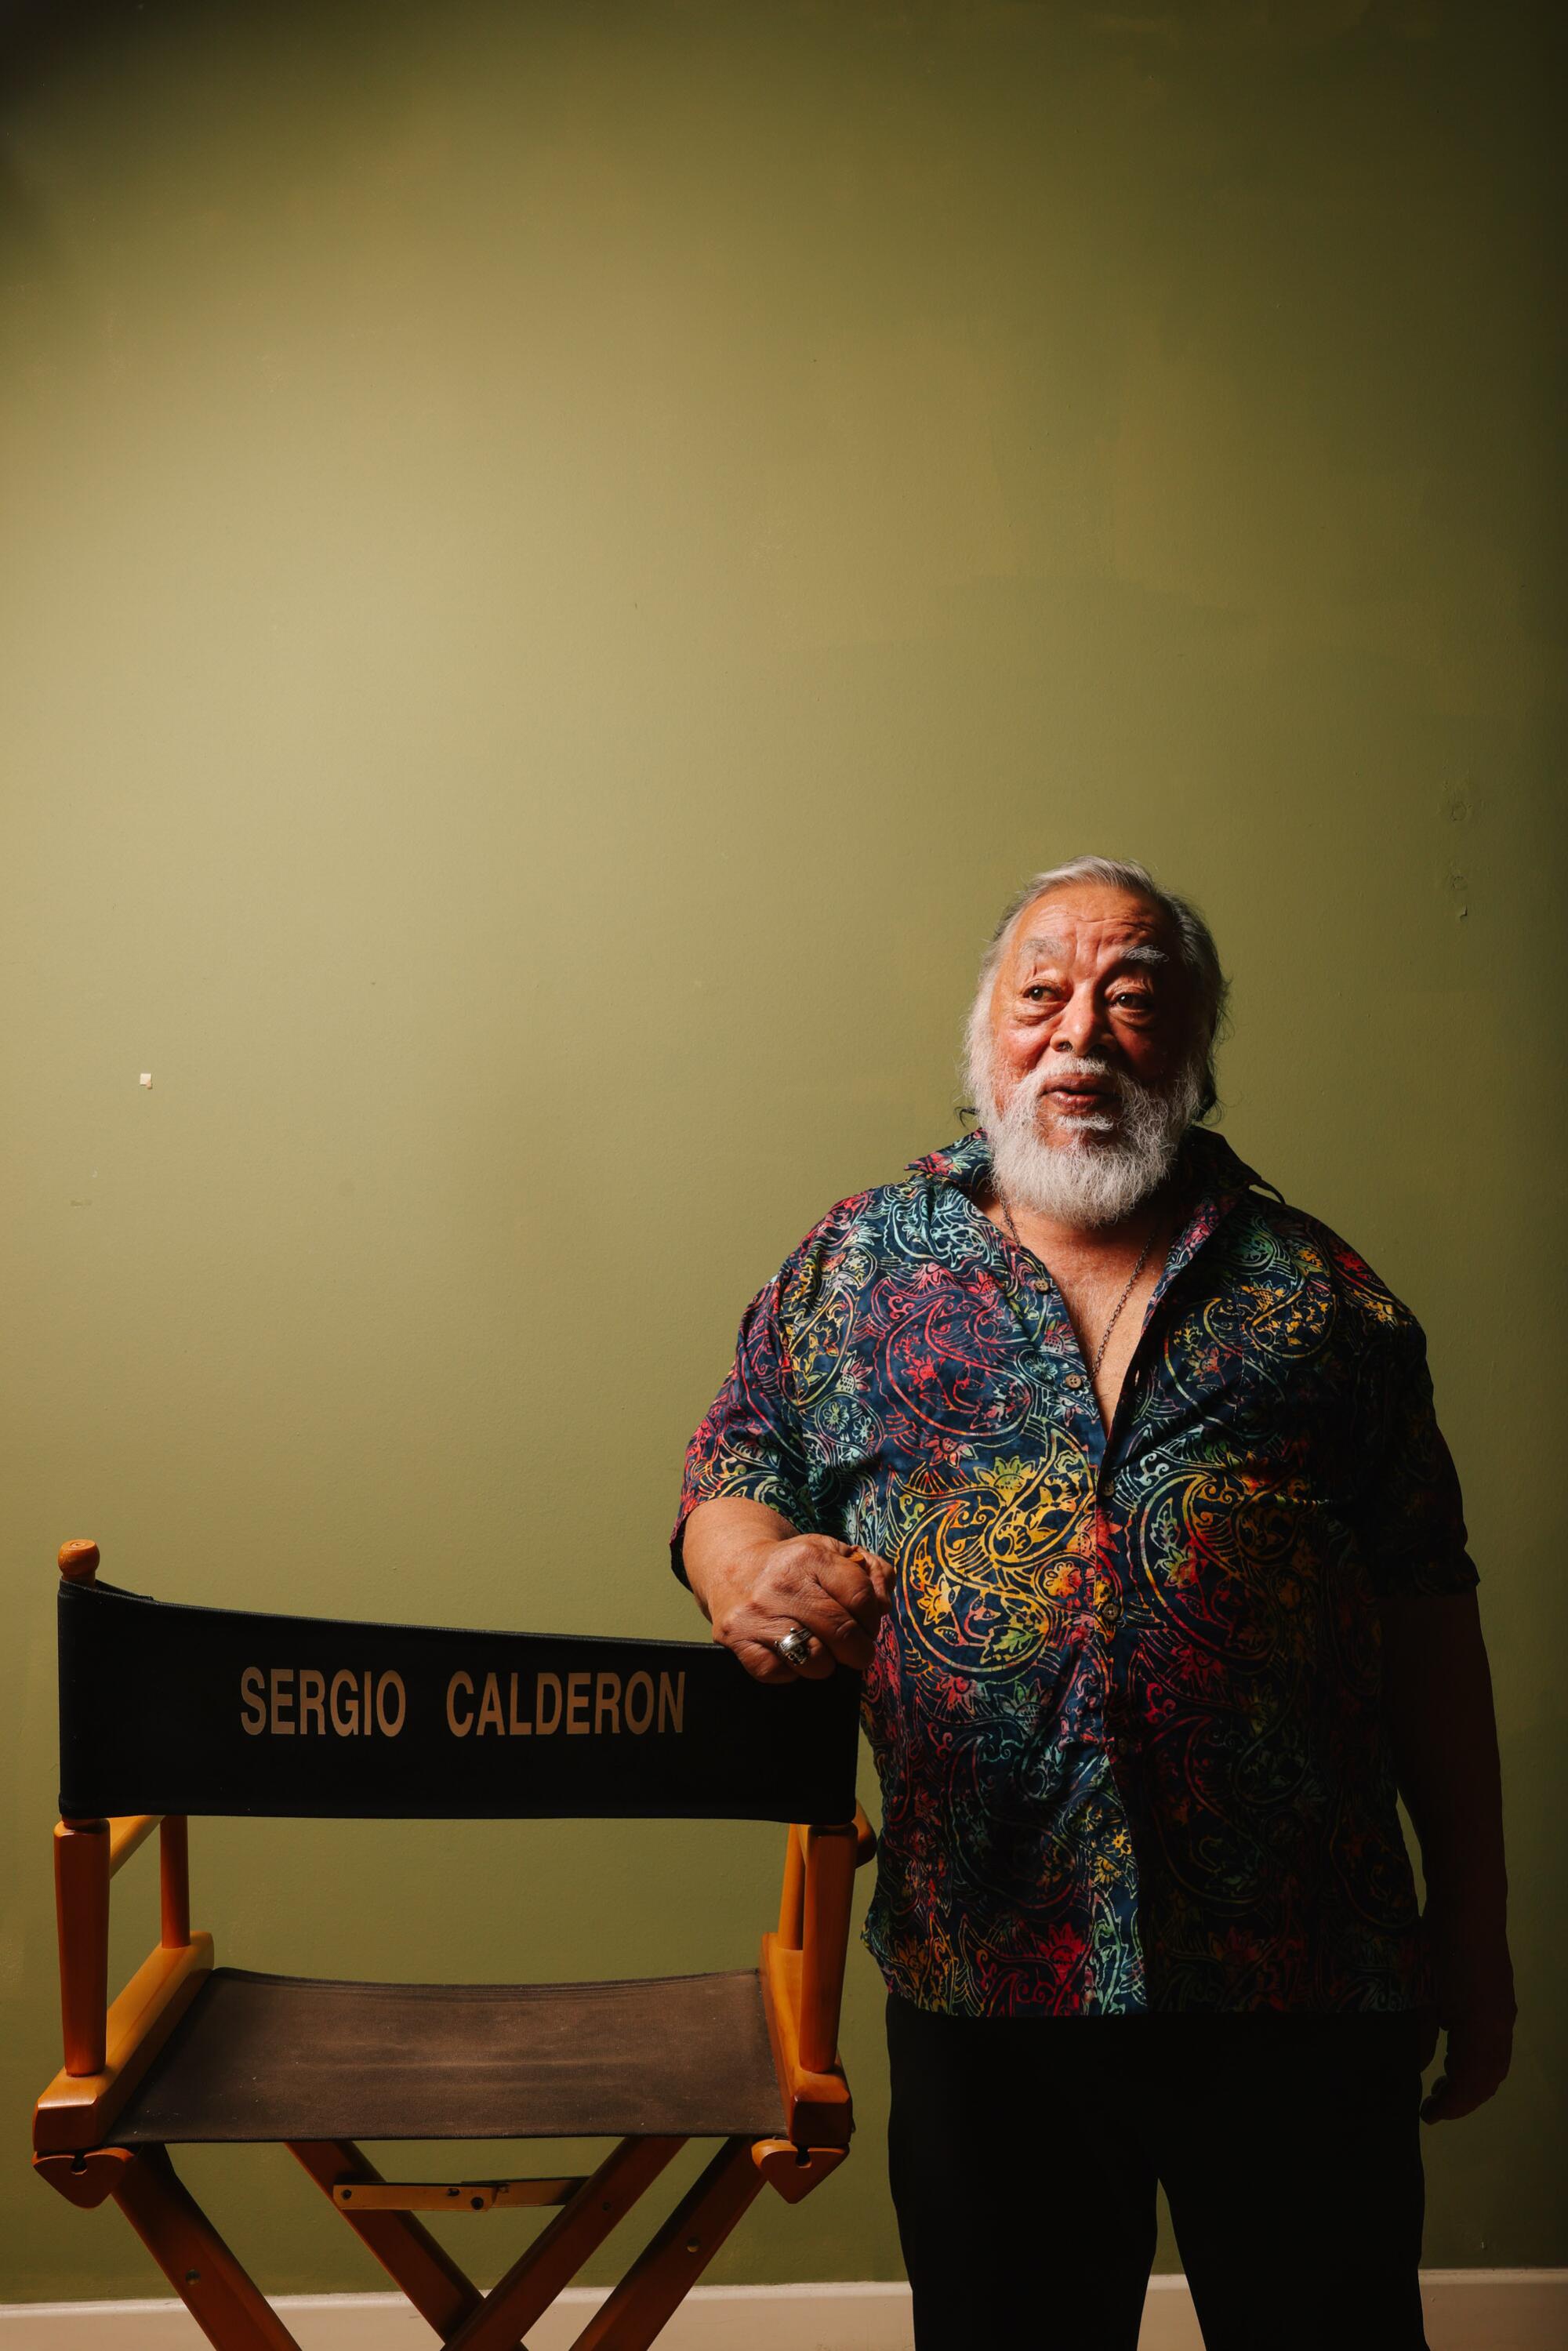 A man stands next to a director's chair with his name Sergio Calderon on the back of it.